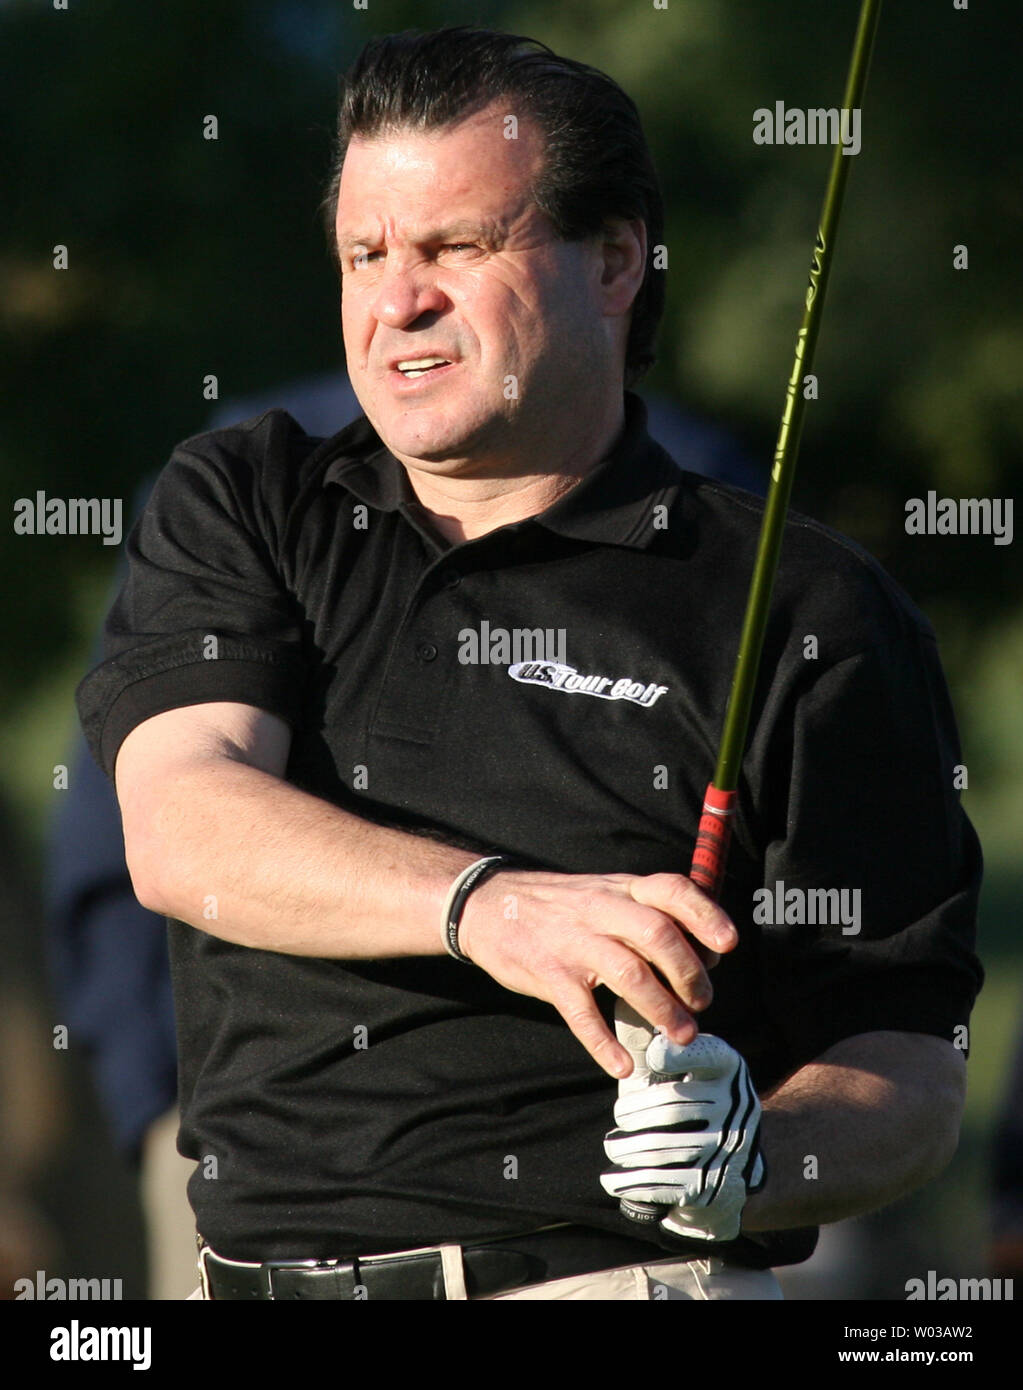 Hockey player and captain of the USA gold medal team of 1980 Mike Eruzione watches his tee shot during the first round of play of the Bob Hope Chrysler Classic at Bermuda Dunes Country Club in Bermuda Dunes, California on January 17, 2007.   (UPI Photo/Art Foxall) Stock Photo